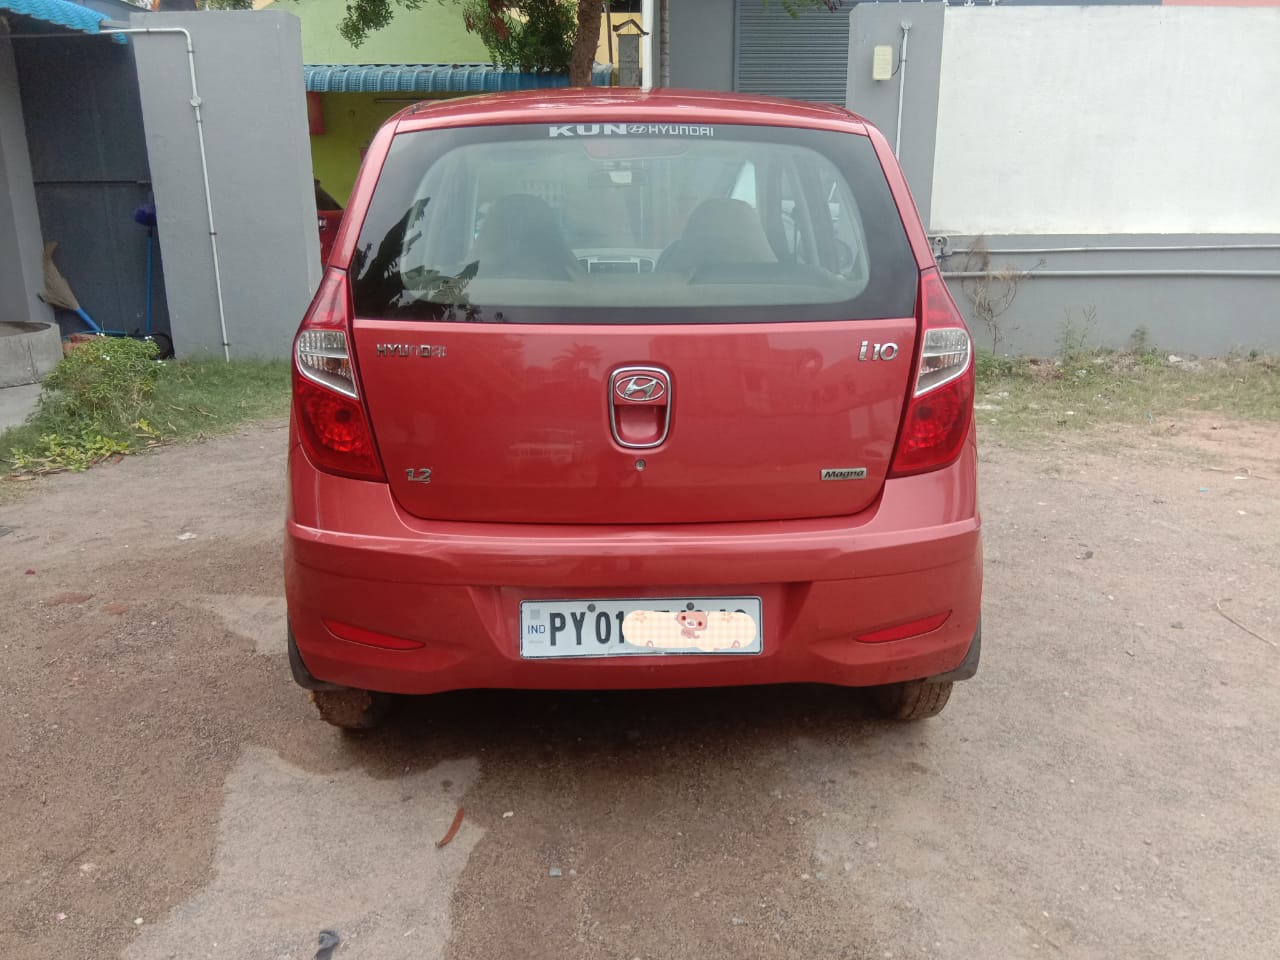 3584-for-sale-Hyundai-i10-Petrol-First-Owner-2009-PY-registered-rs-0